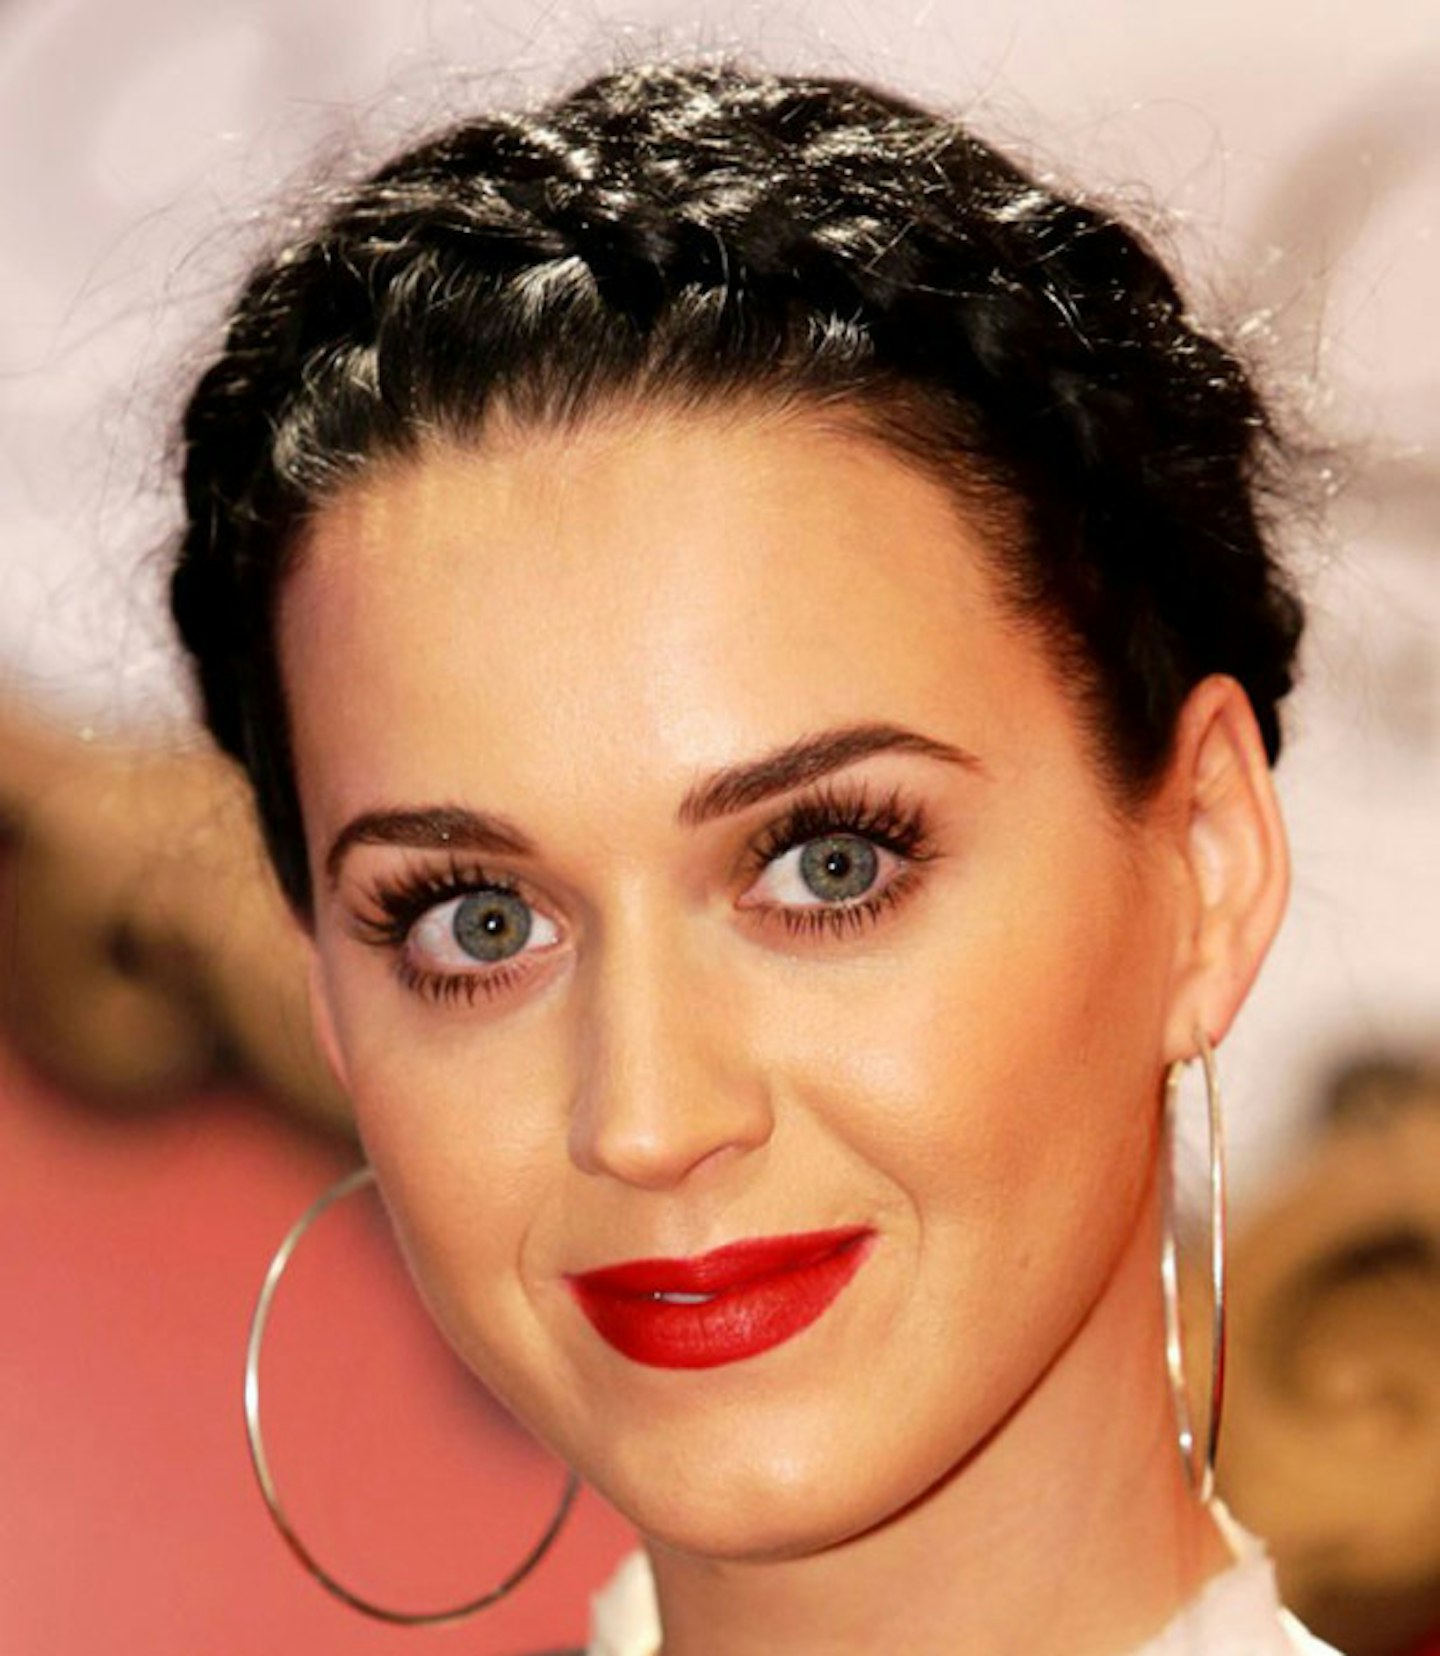 Katy Perry's intricate overhead plait